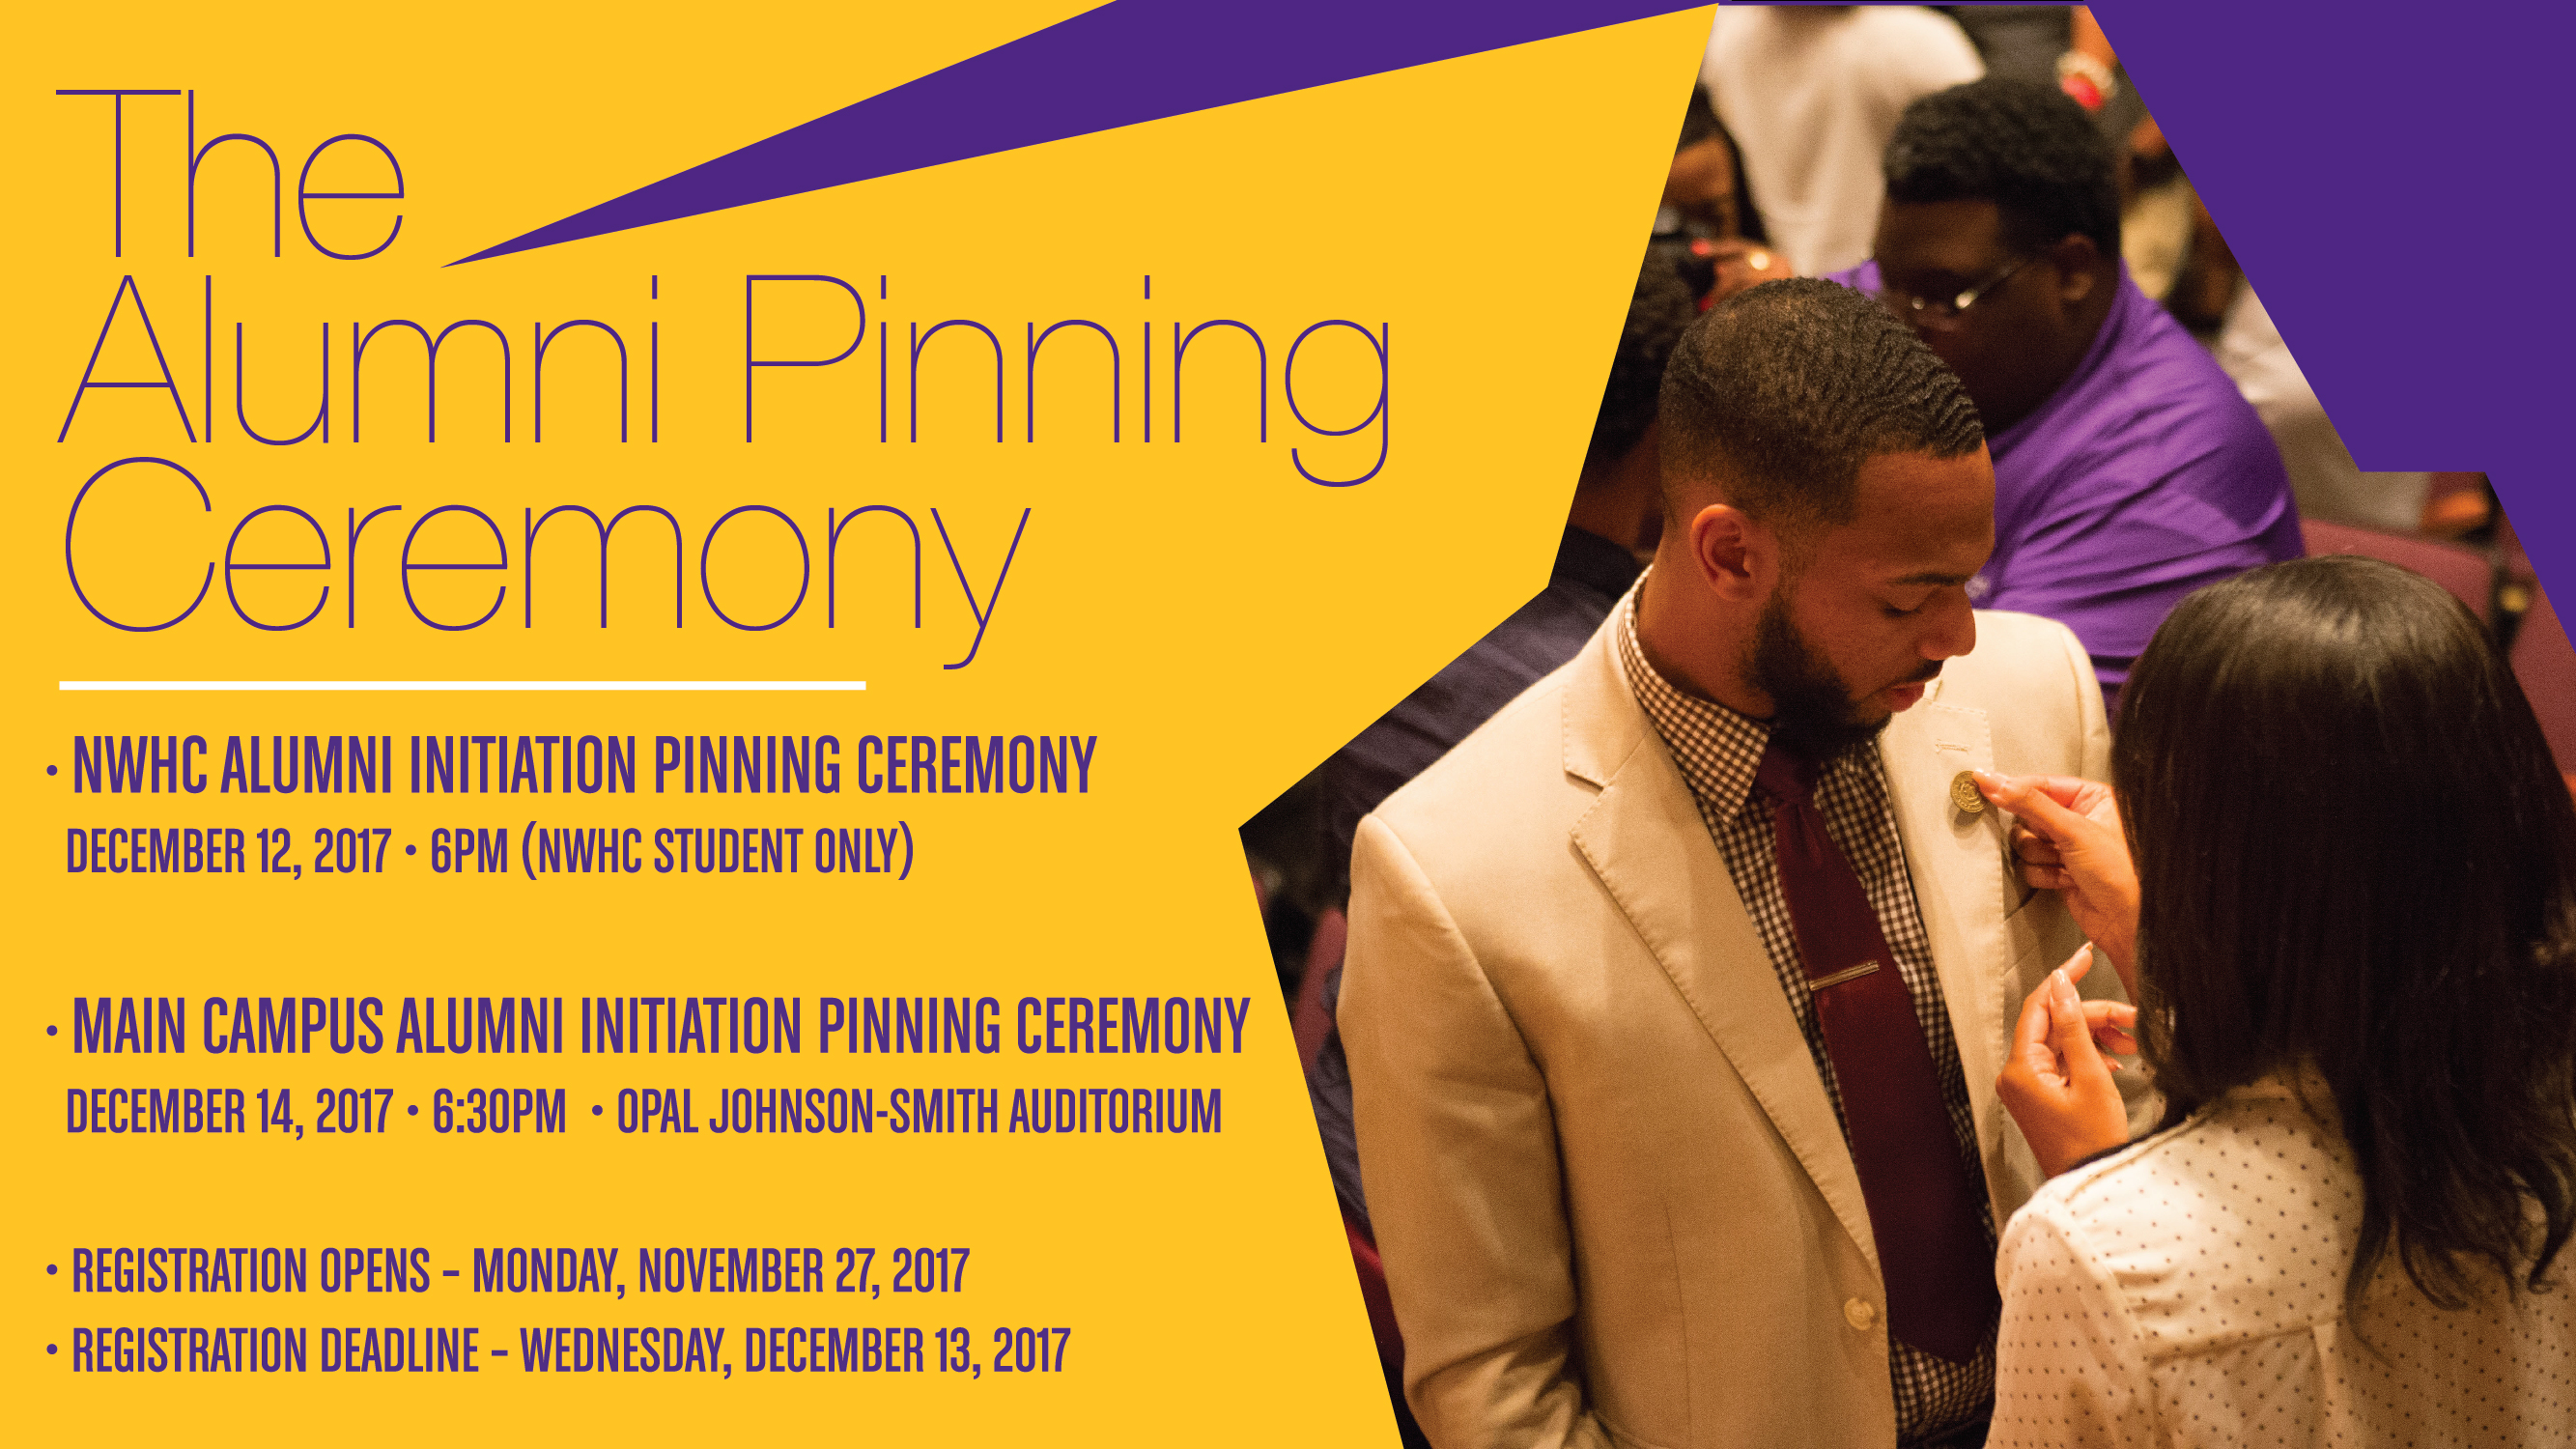 Annual Pinning Ceremony FLyer